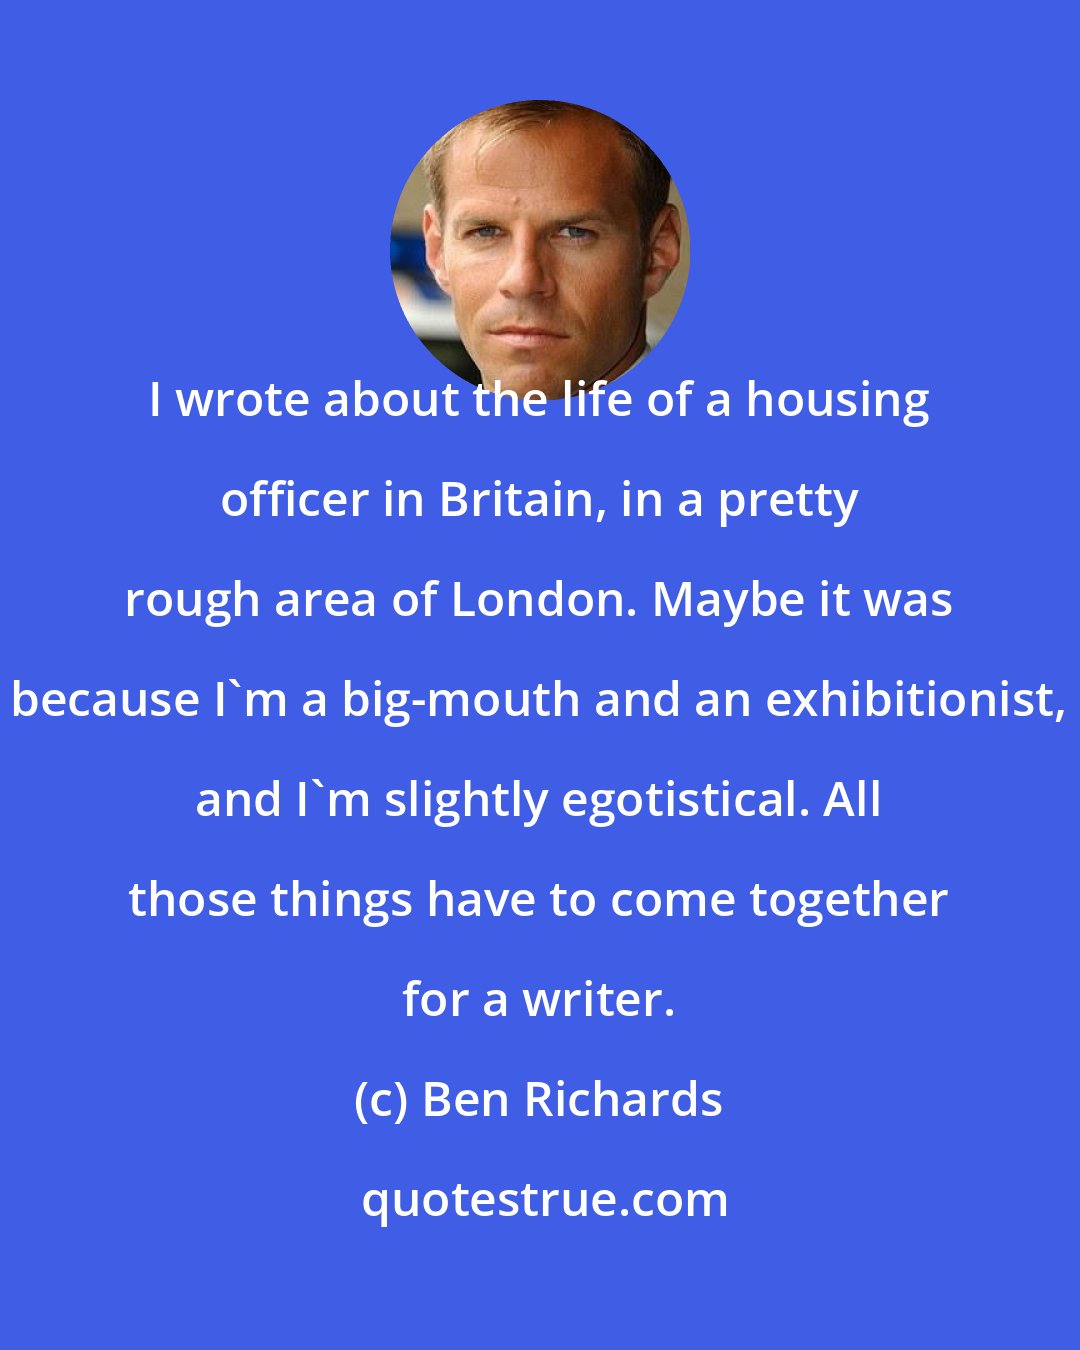 Ben Richards: I wrote about the life of a housing officer in Britain, in a pretty rough area of London. Maybe it was because I'm a big-mouth and an exhibitionist, and I'm slightly egotistical. All those things have to come together for a writer.